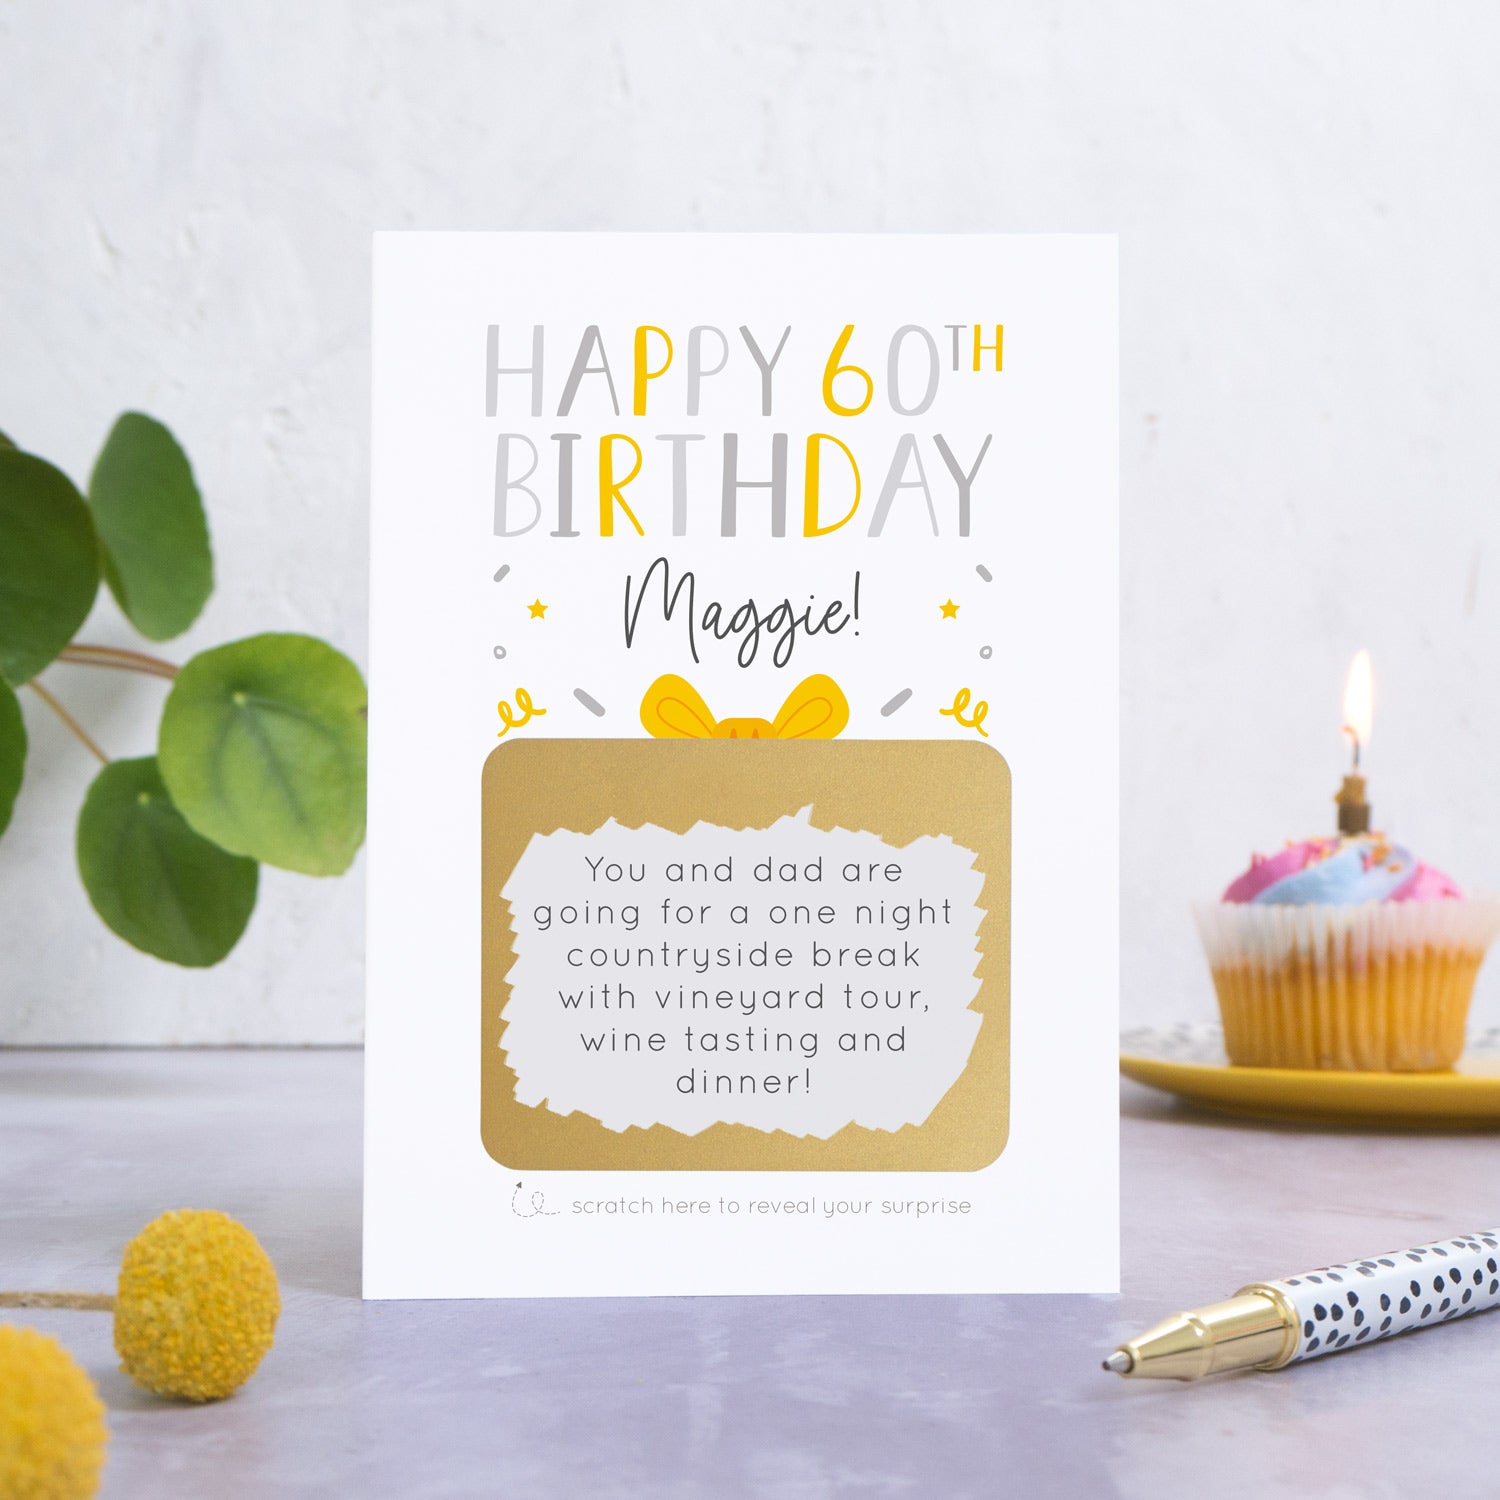 A personalised happy 60th birthday scratch card in grey that has been photographed on a white and grey background. There is foliage and yellow flowers on the left and a cupcake and a pen to the right. The card features the recipients name and a scratch panel that has been scratched off revealing a personalised message.